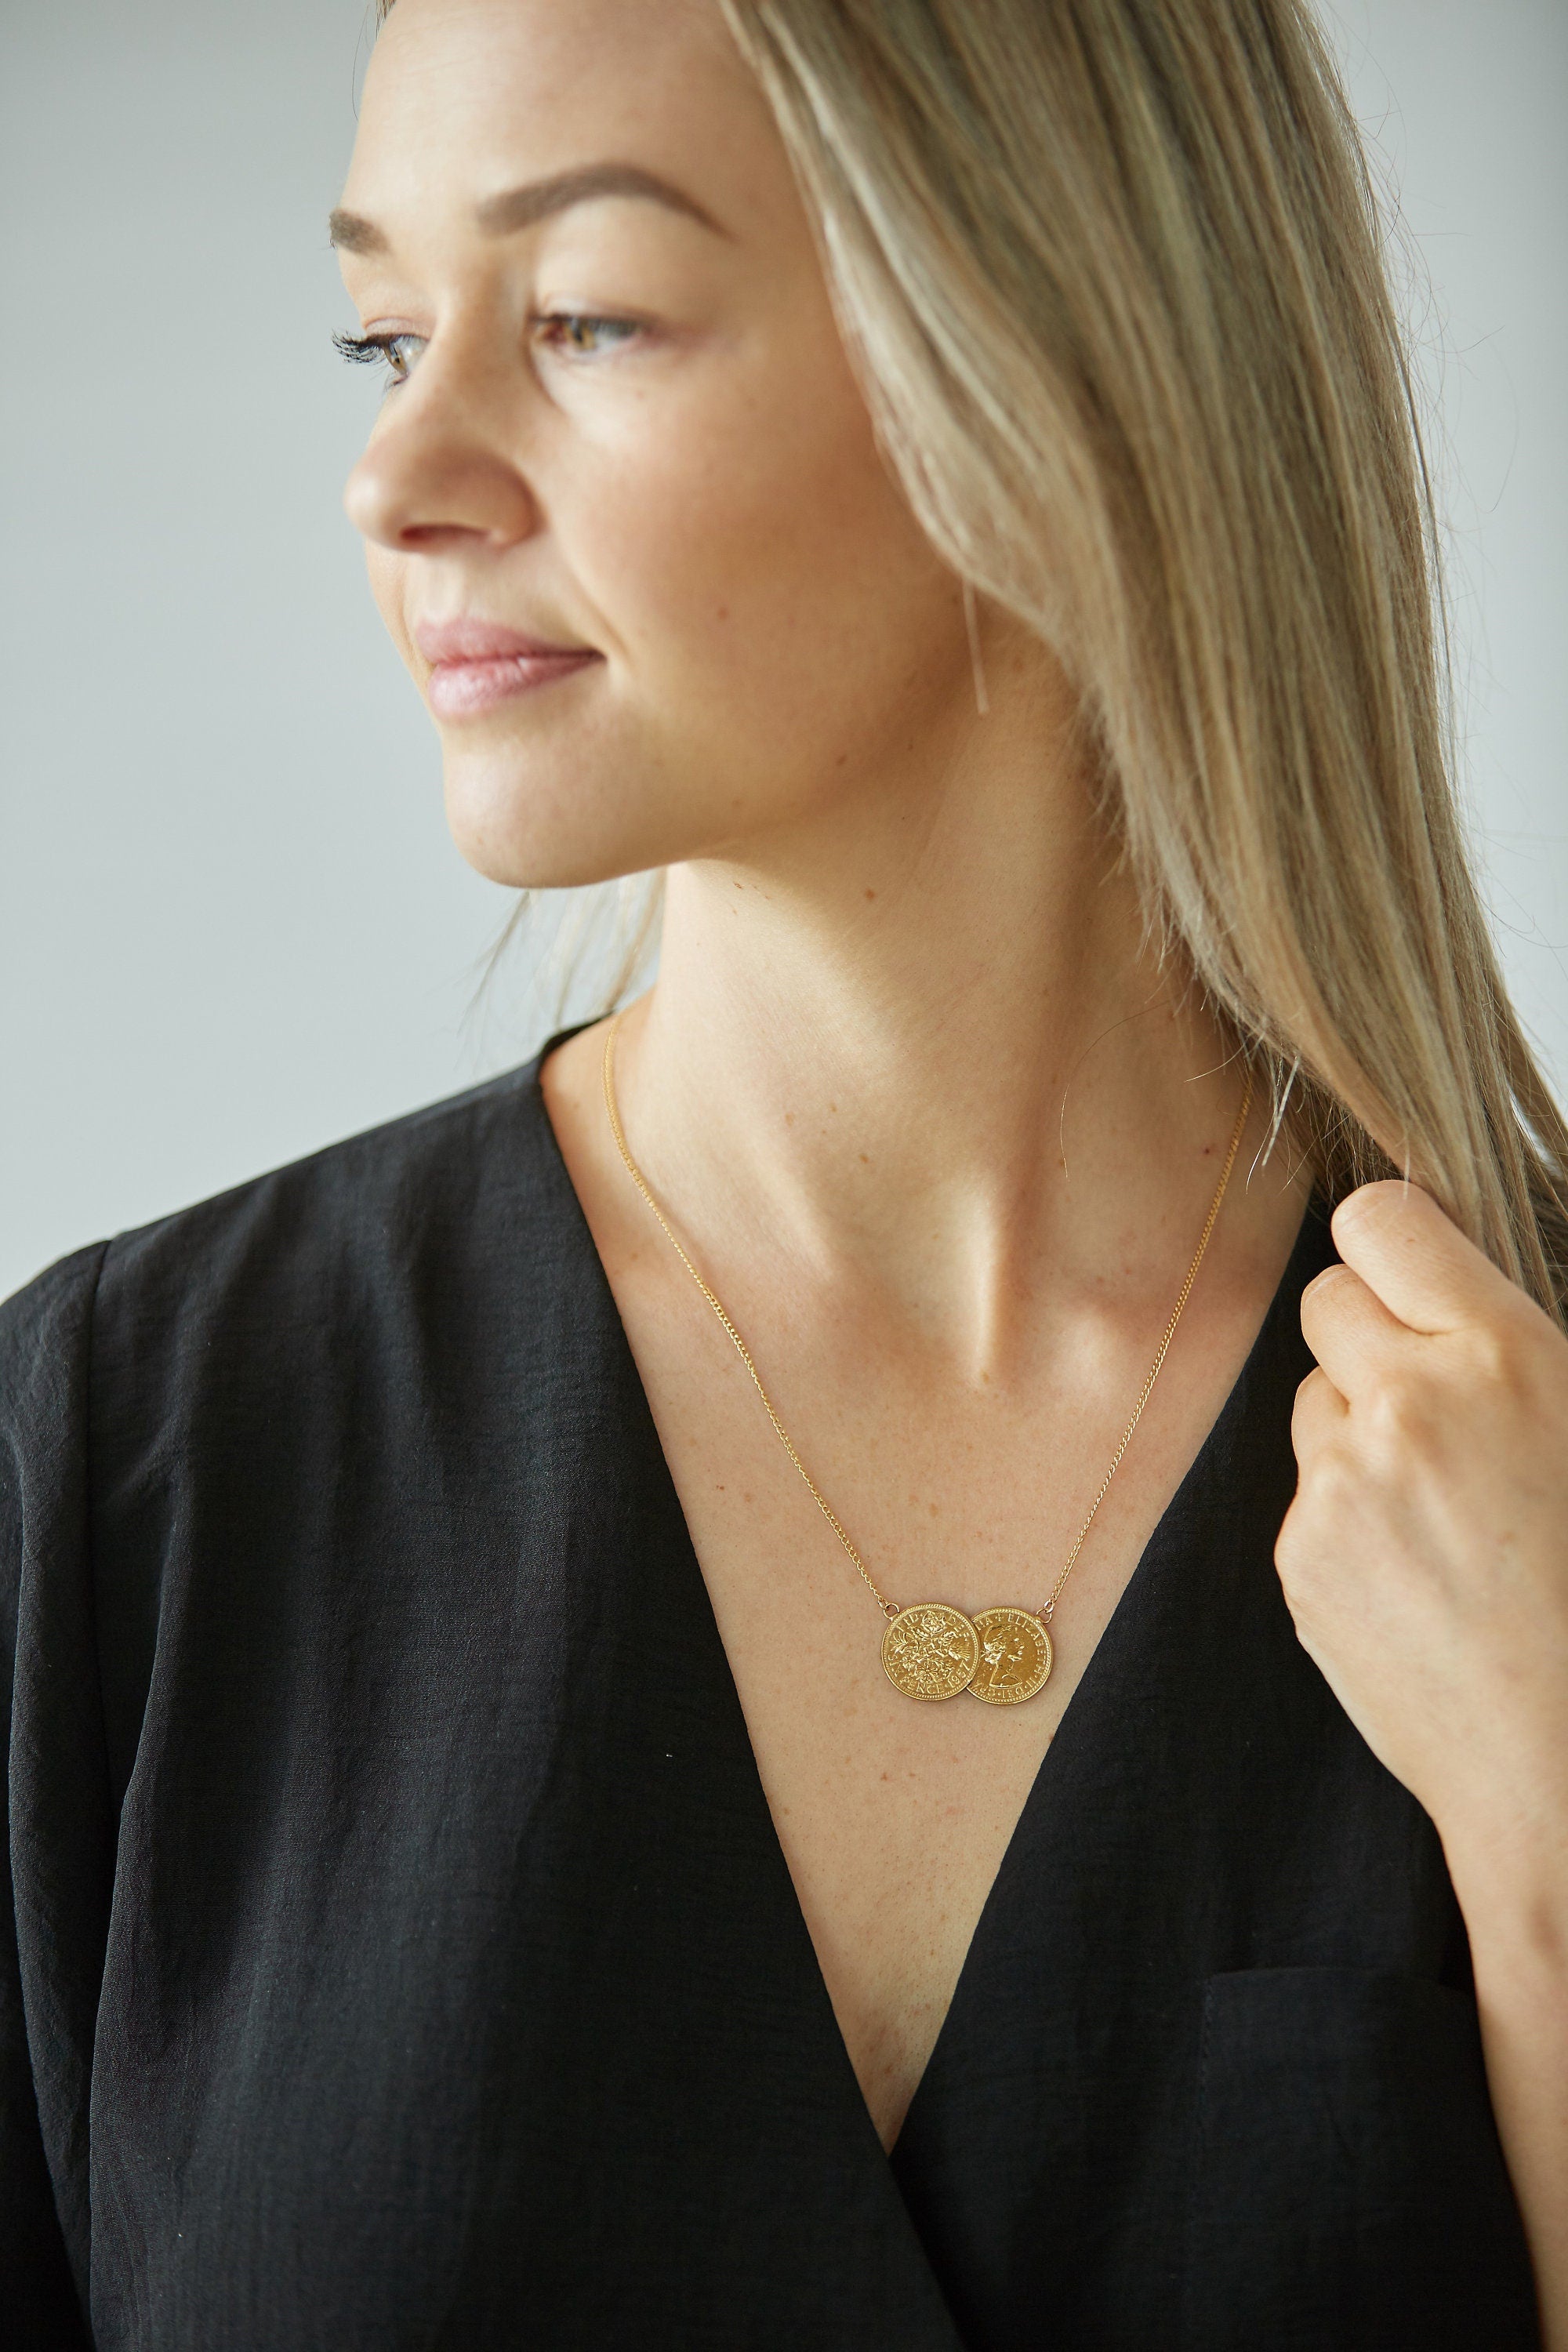 My Sixpence Double Coin Necklace | fashionmommy's Blog